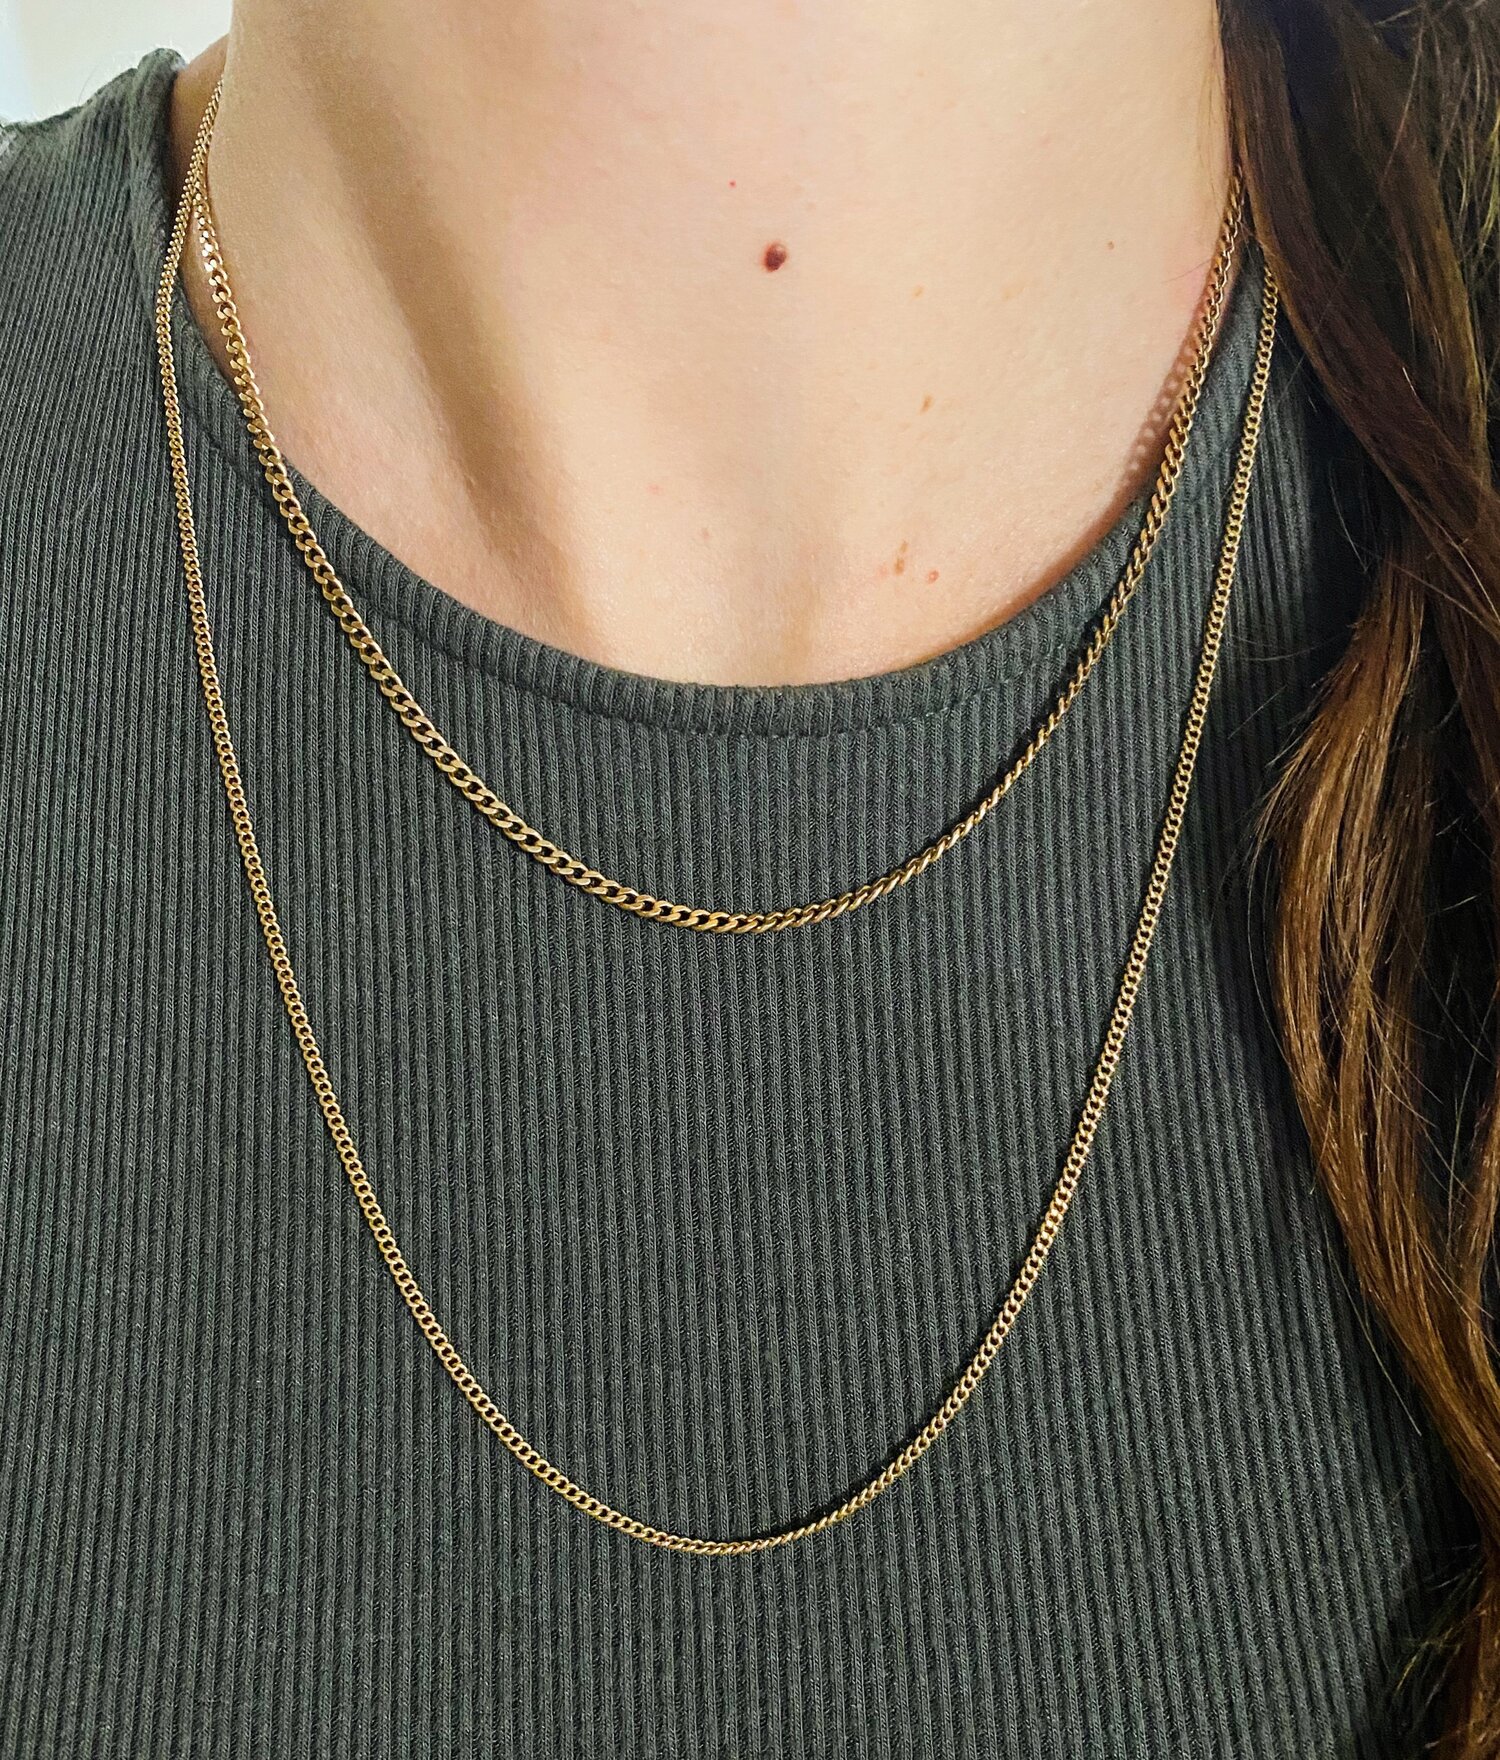 CURB-LINK GOLD CHAIN NECKLACE; 23” — SAMANTHA KNIGHT fine jewelry